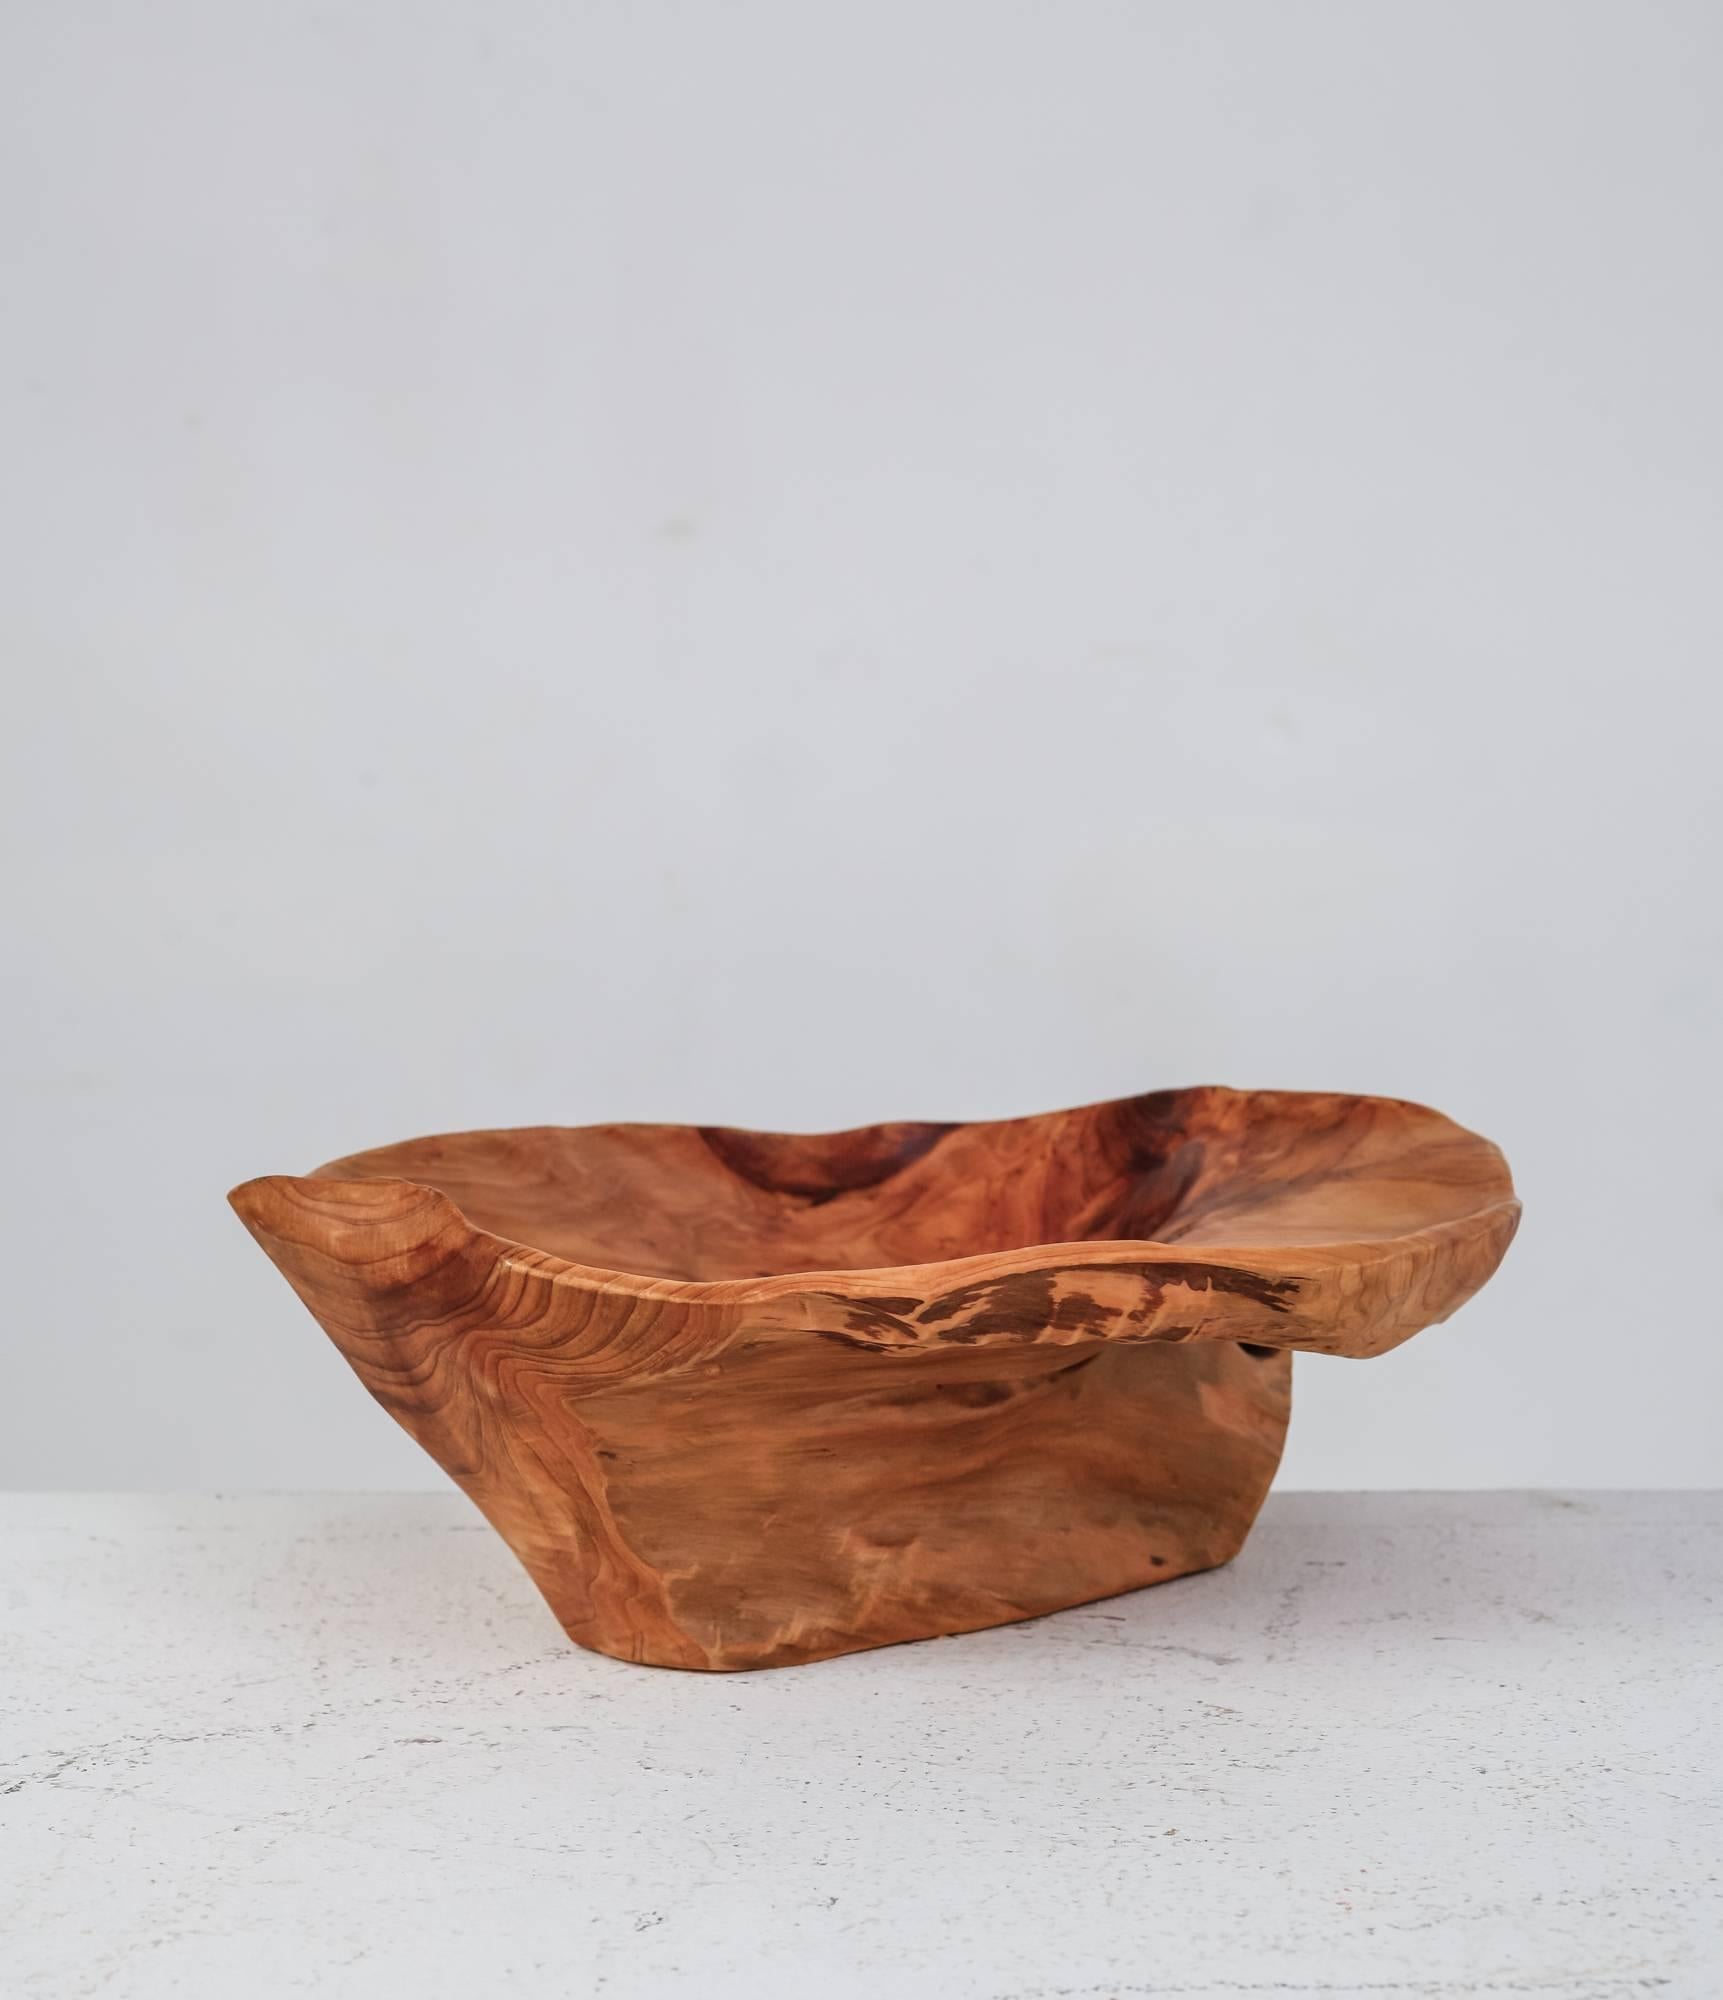 A sculptural, carved bowl by an American craftsman, made of a light root wood. The bowl is signed with 'CC 72,' presumably the initials of the artist and the year of production.
